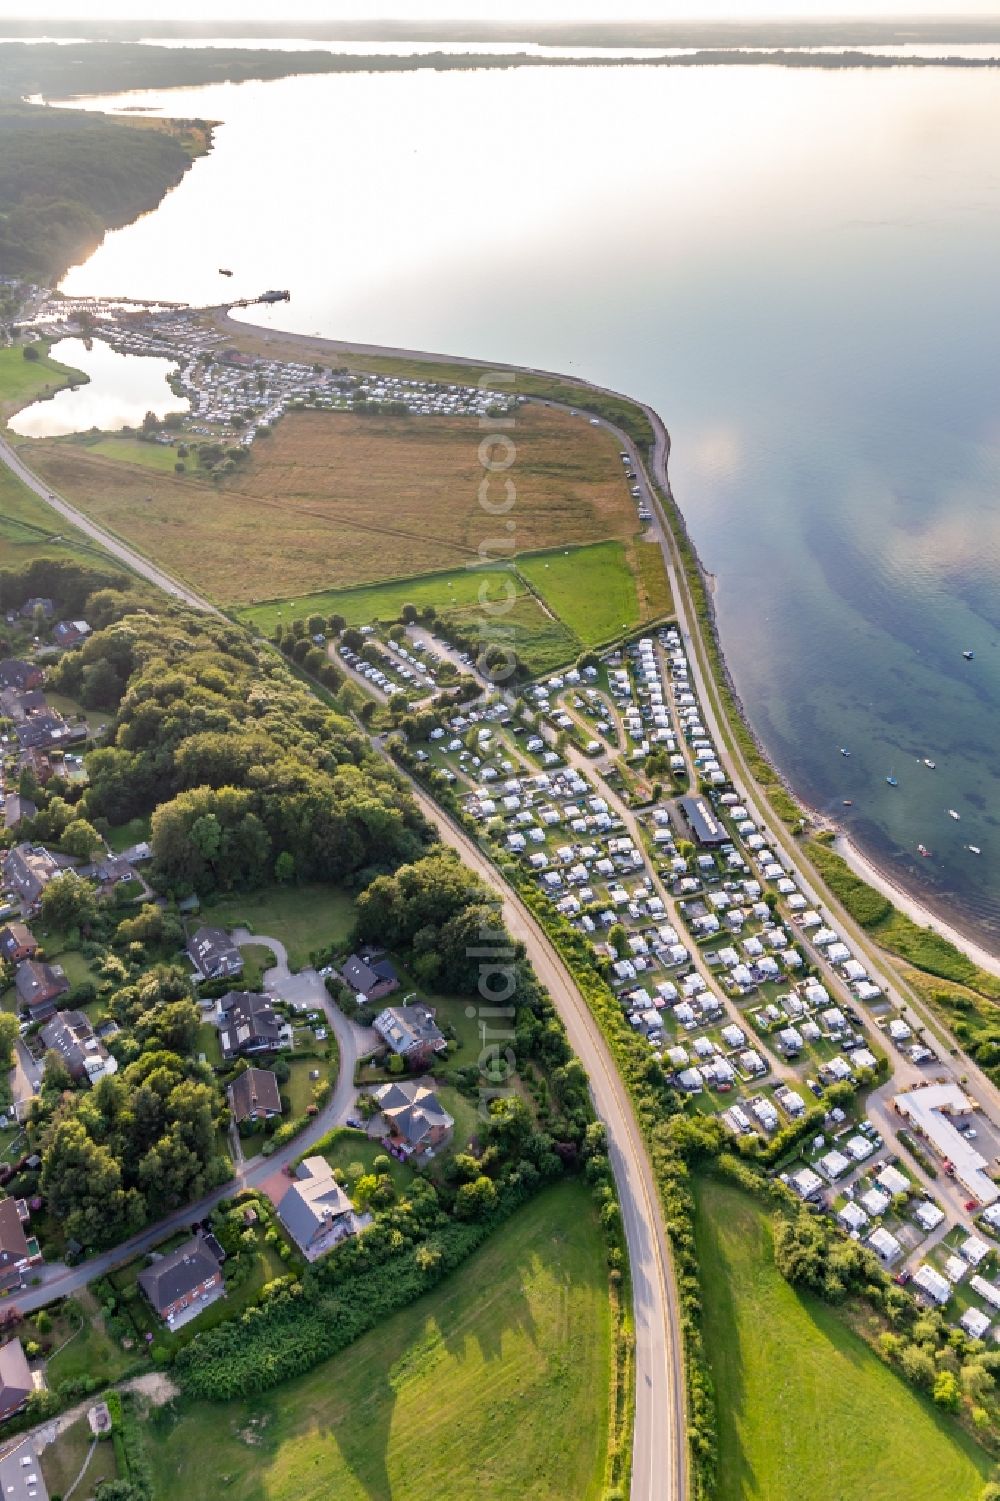 Aerial image Langballigholz - Camping with caravans and tents at the Baltic beach in Langballigholz in Schleswig-Holstein